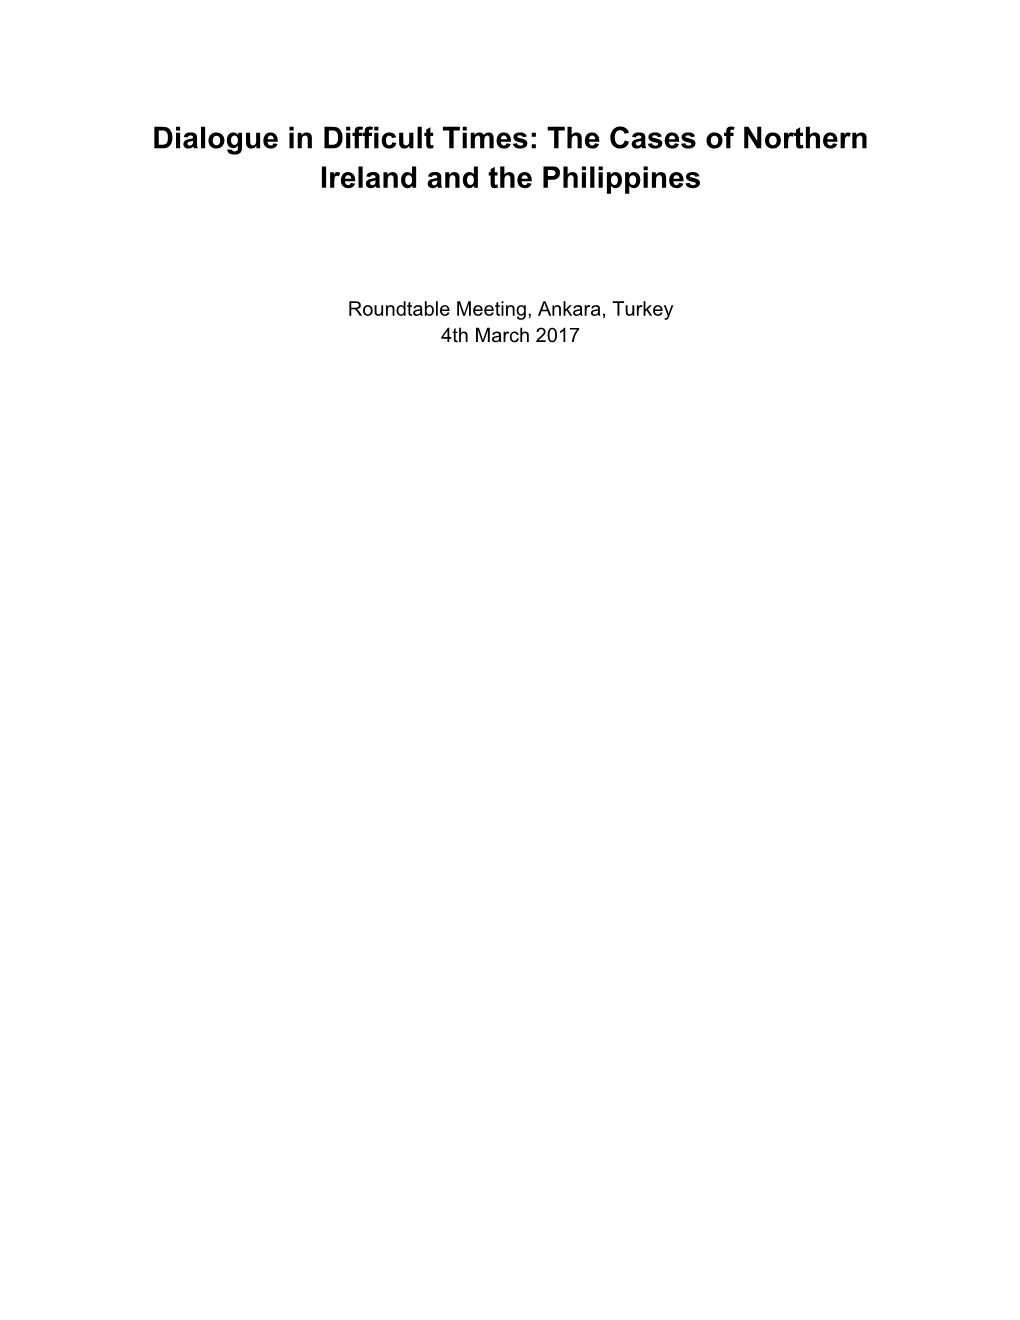 Dialogue in Difficult Times: the Cases of Northern Ireland and the Philippines